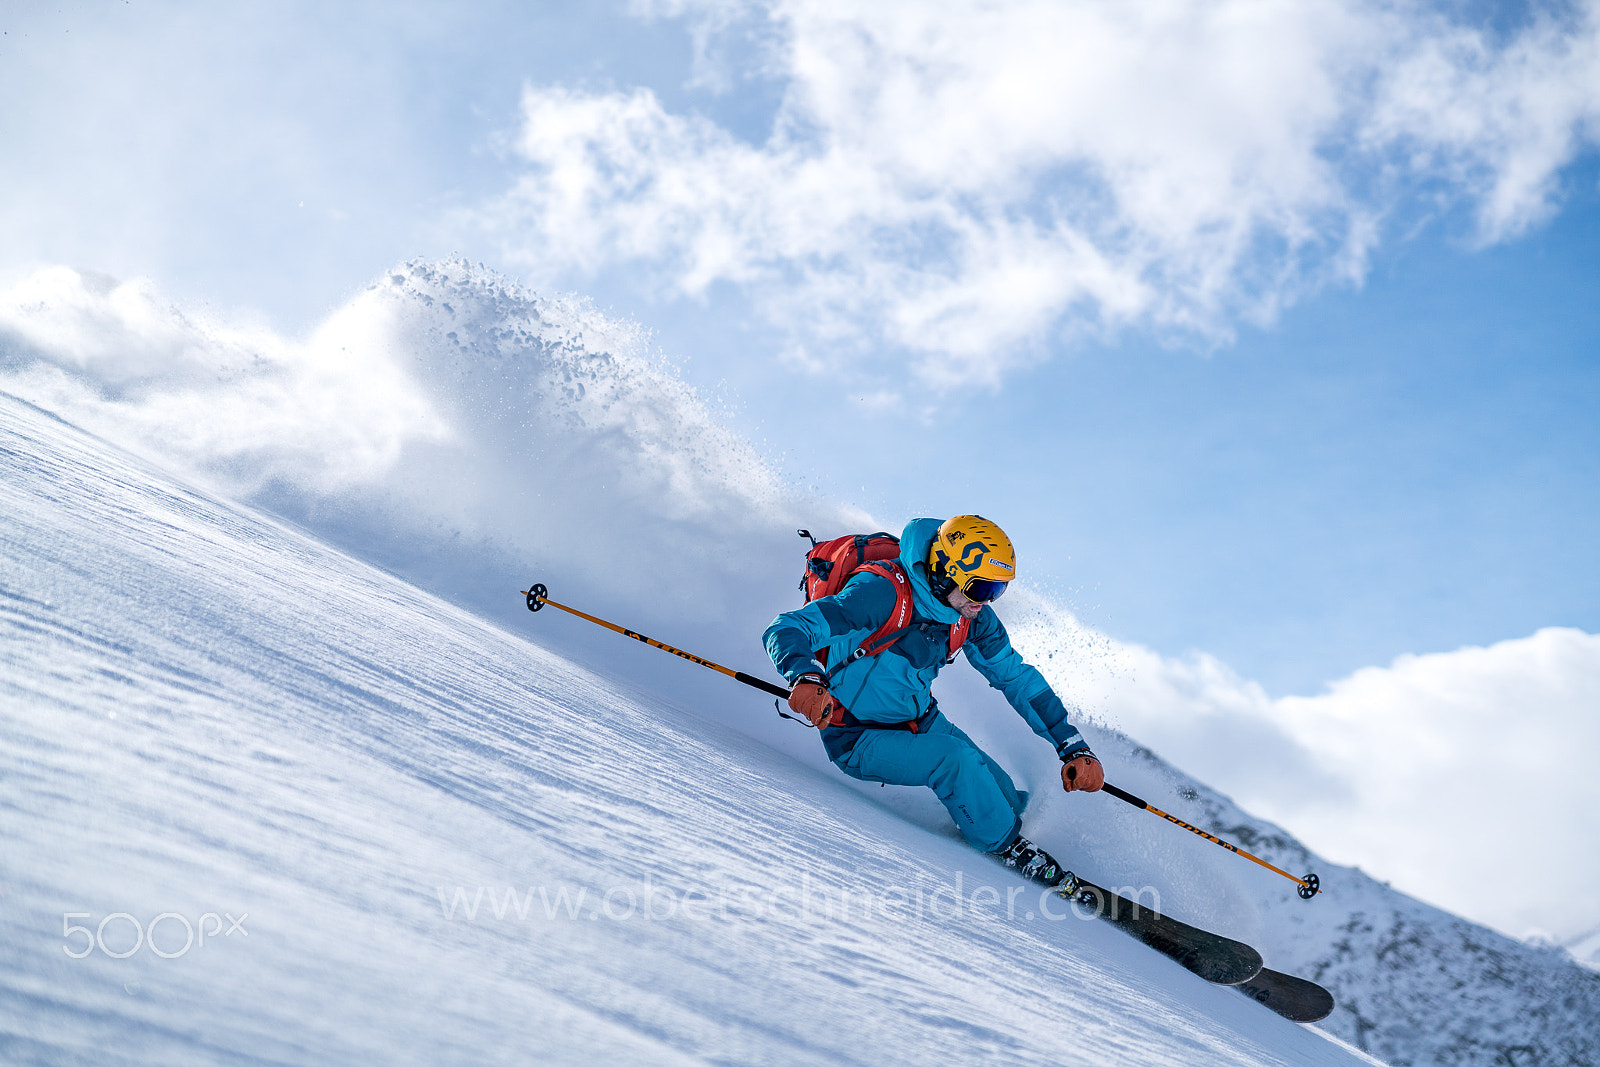 Sony a99 II sample photo. Powder skiing in the alps #6 photography